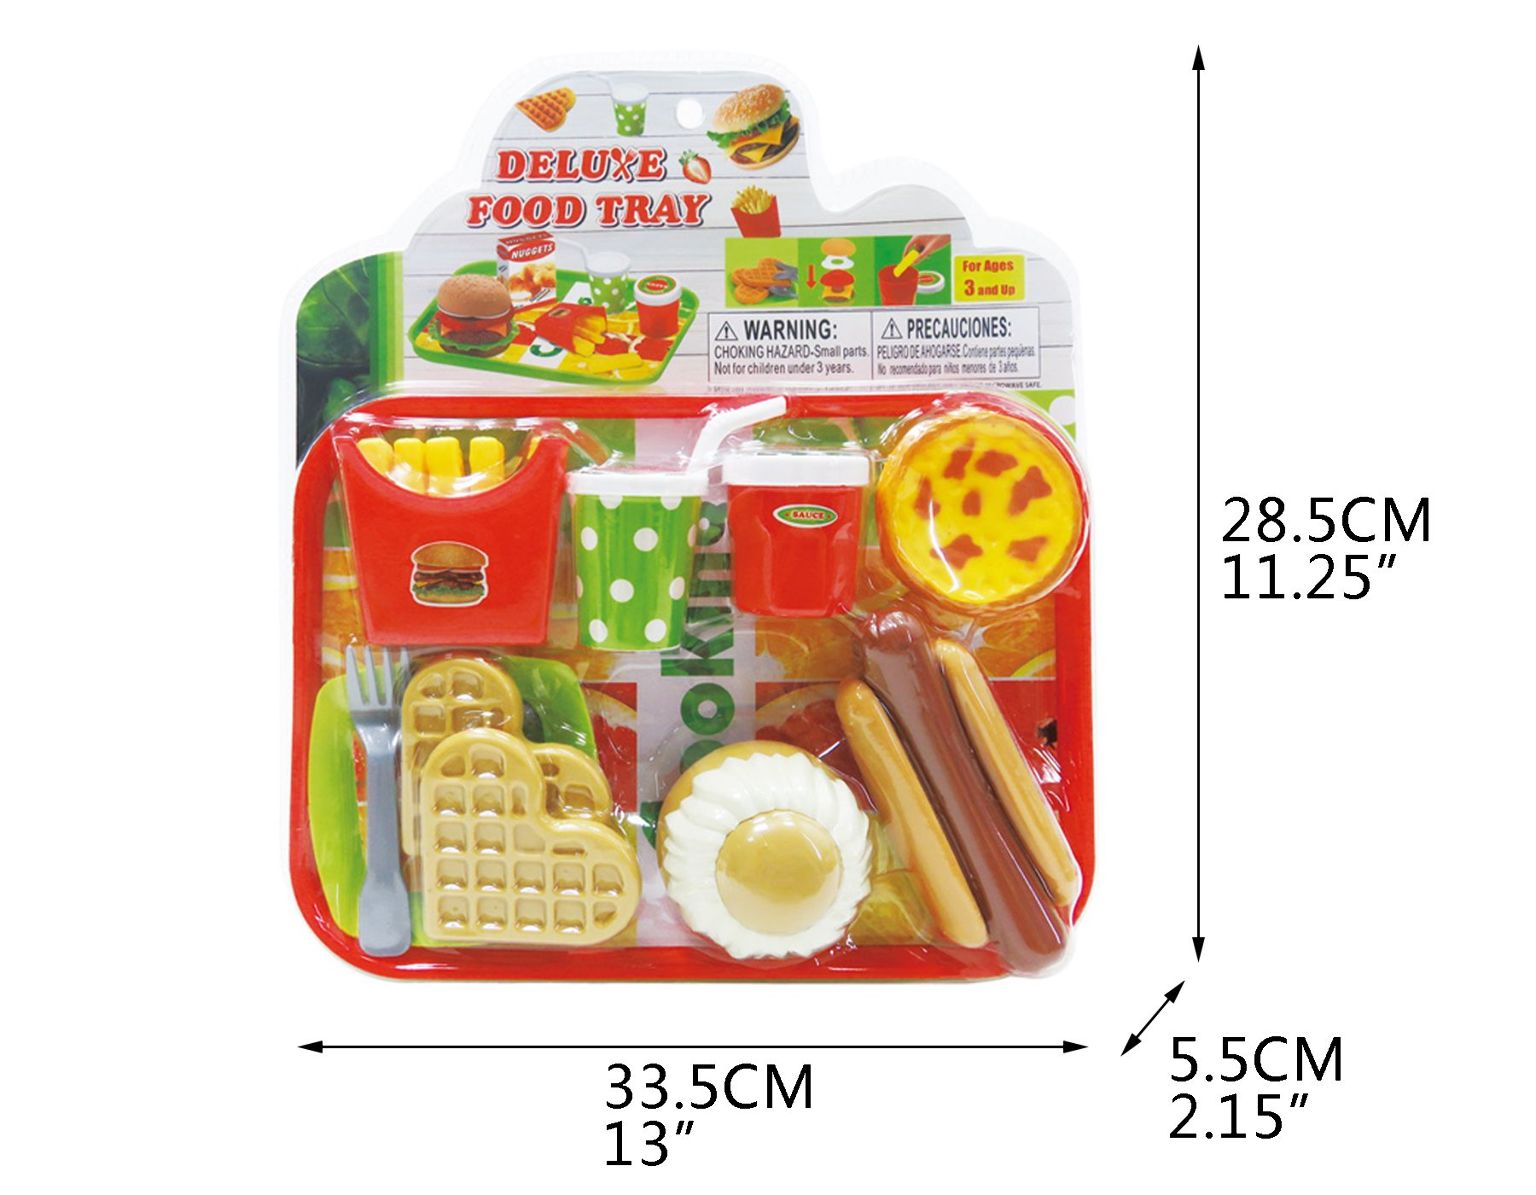 Deluxe Food Tray Playsets - 2 Styles, 20 Pieces